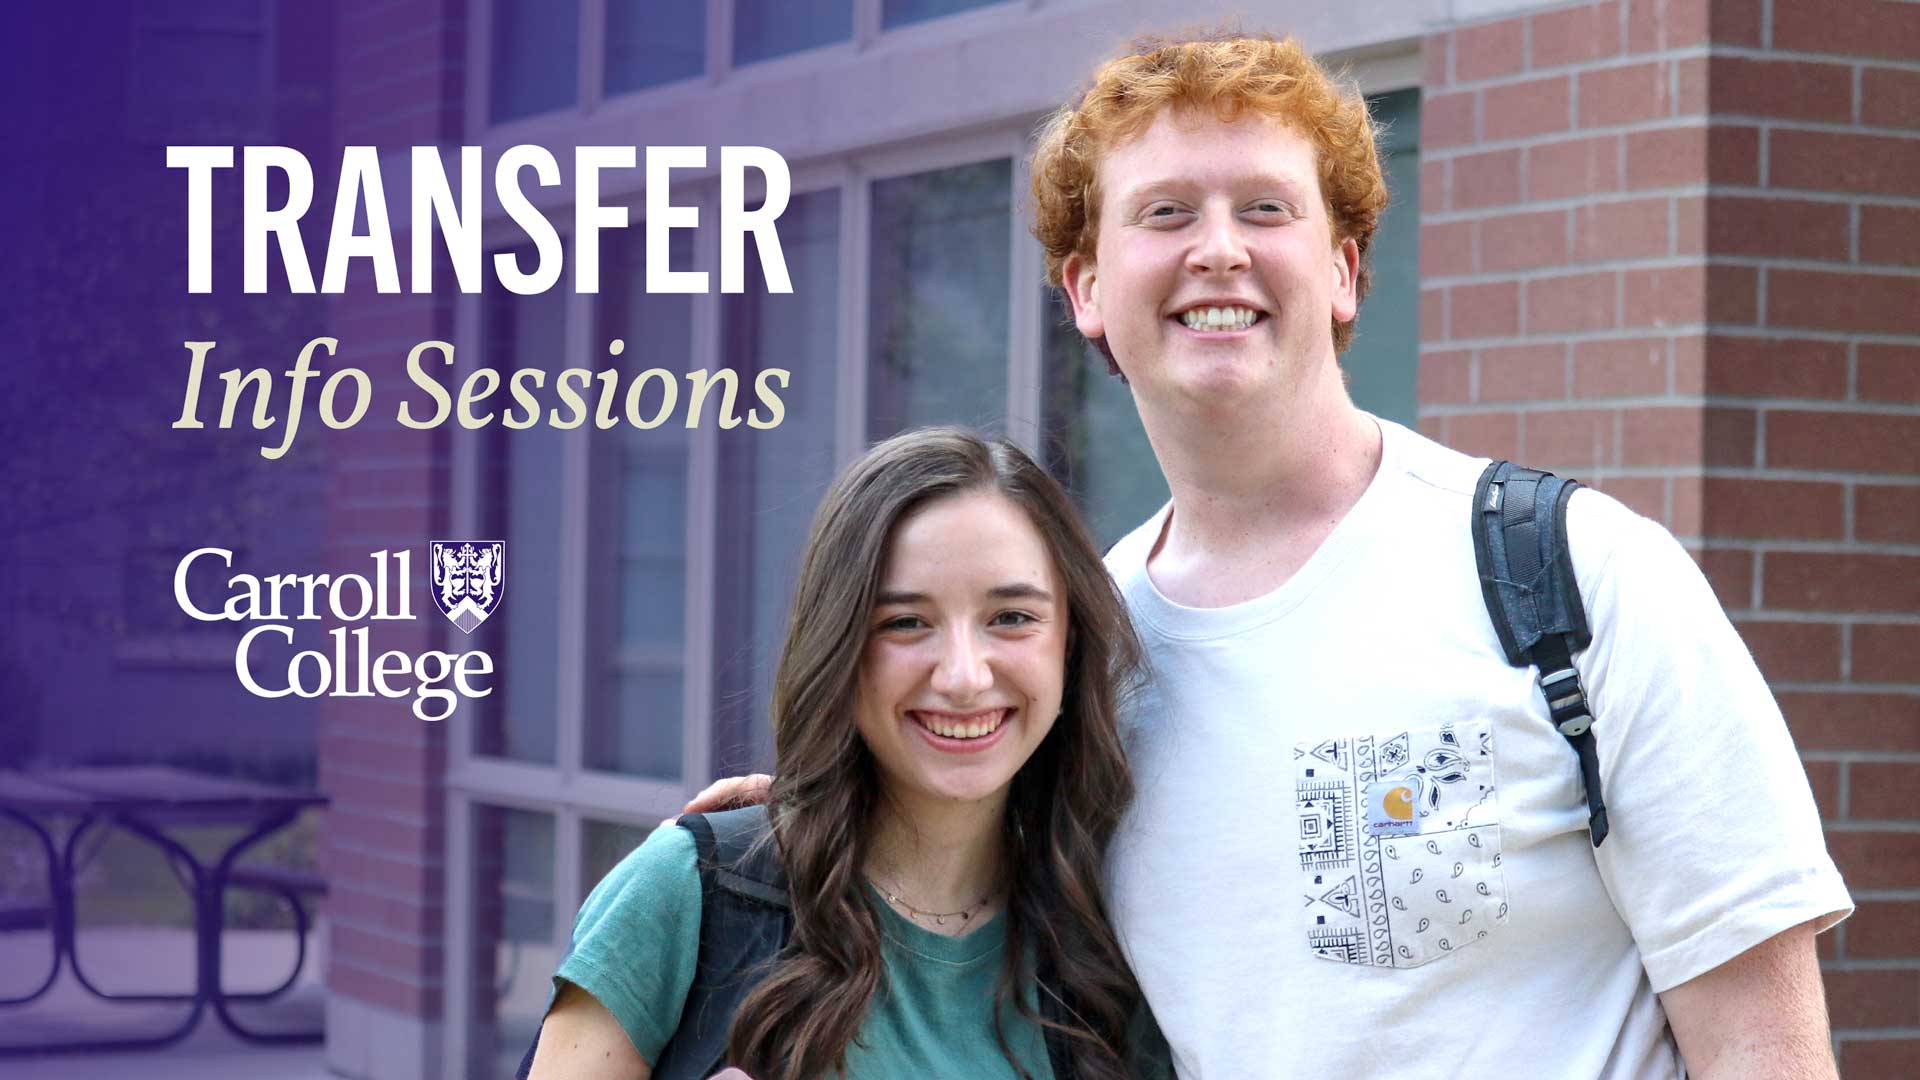 Transfer Info Sessions